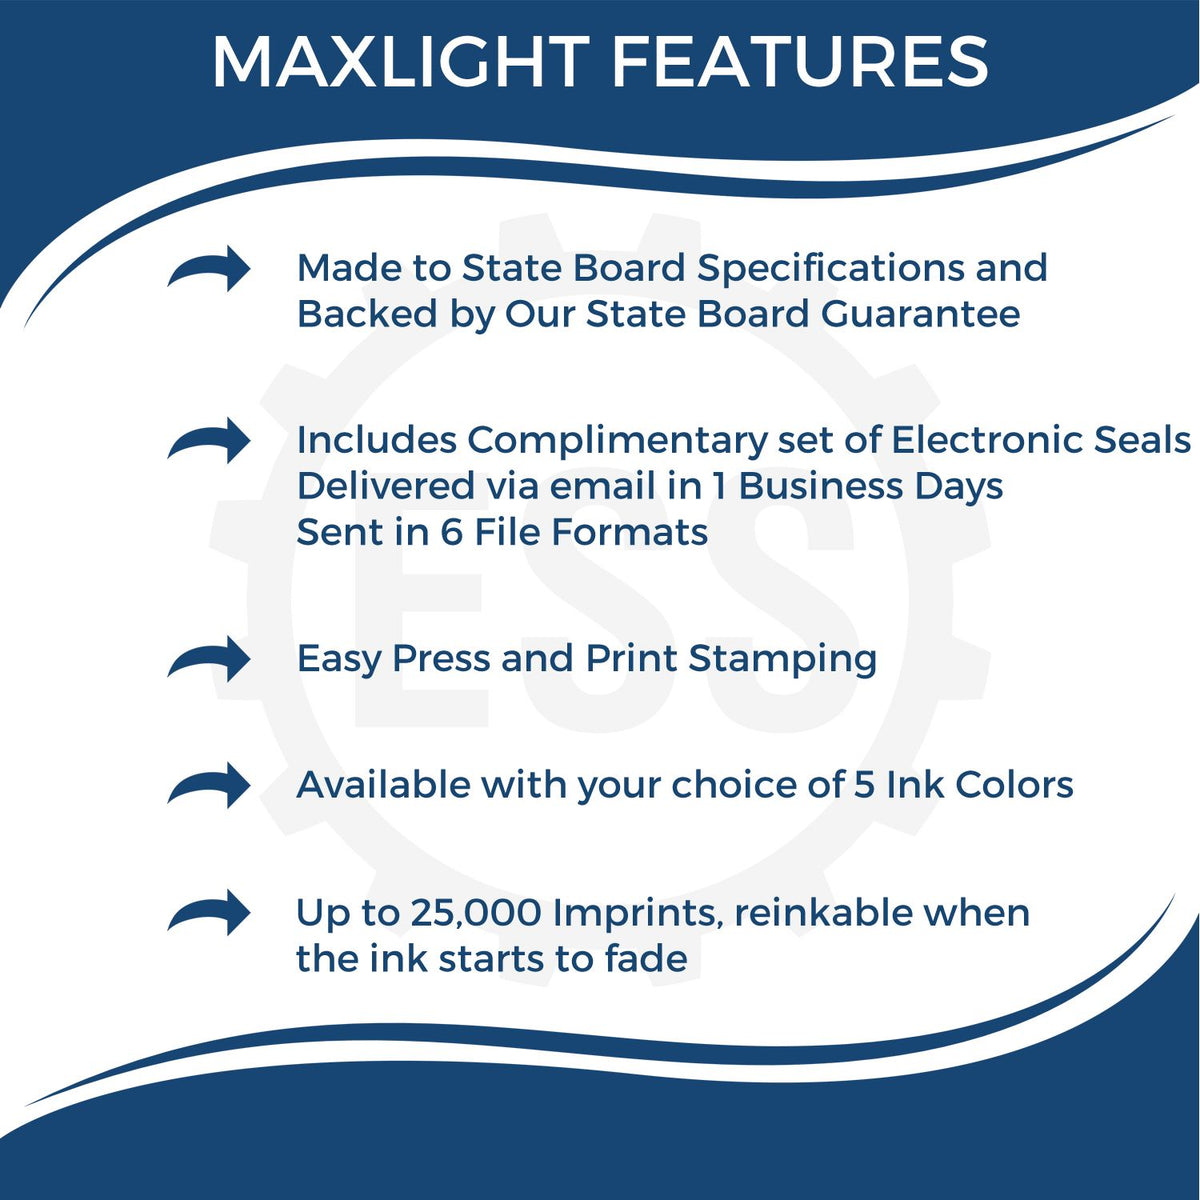 A picture of an infographic highlighting the selling points for the MaxLight Premium Pre-Inked Iowa State Seal Notarial Stamp